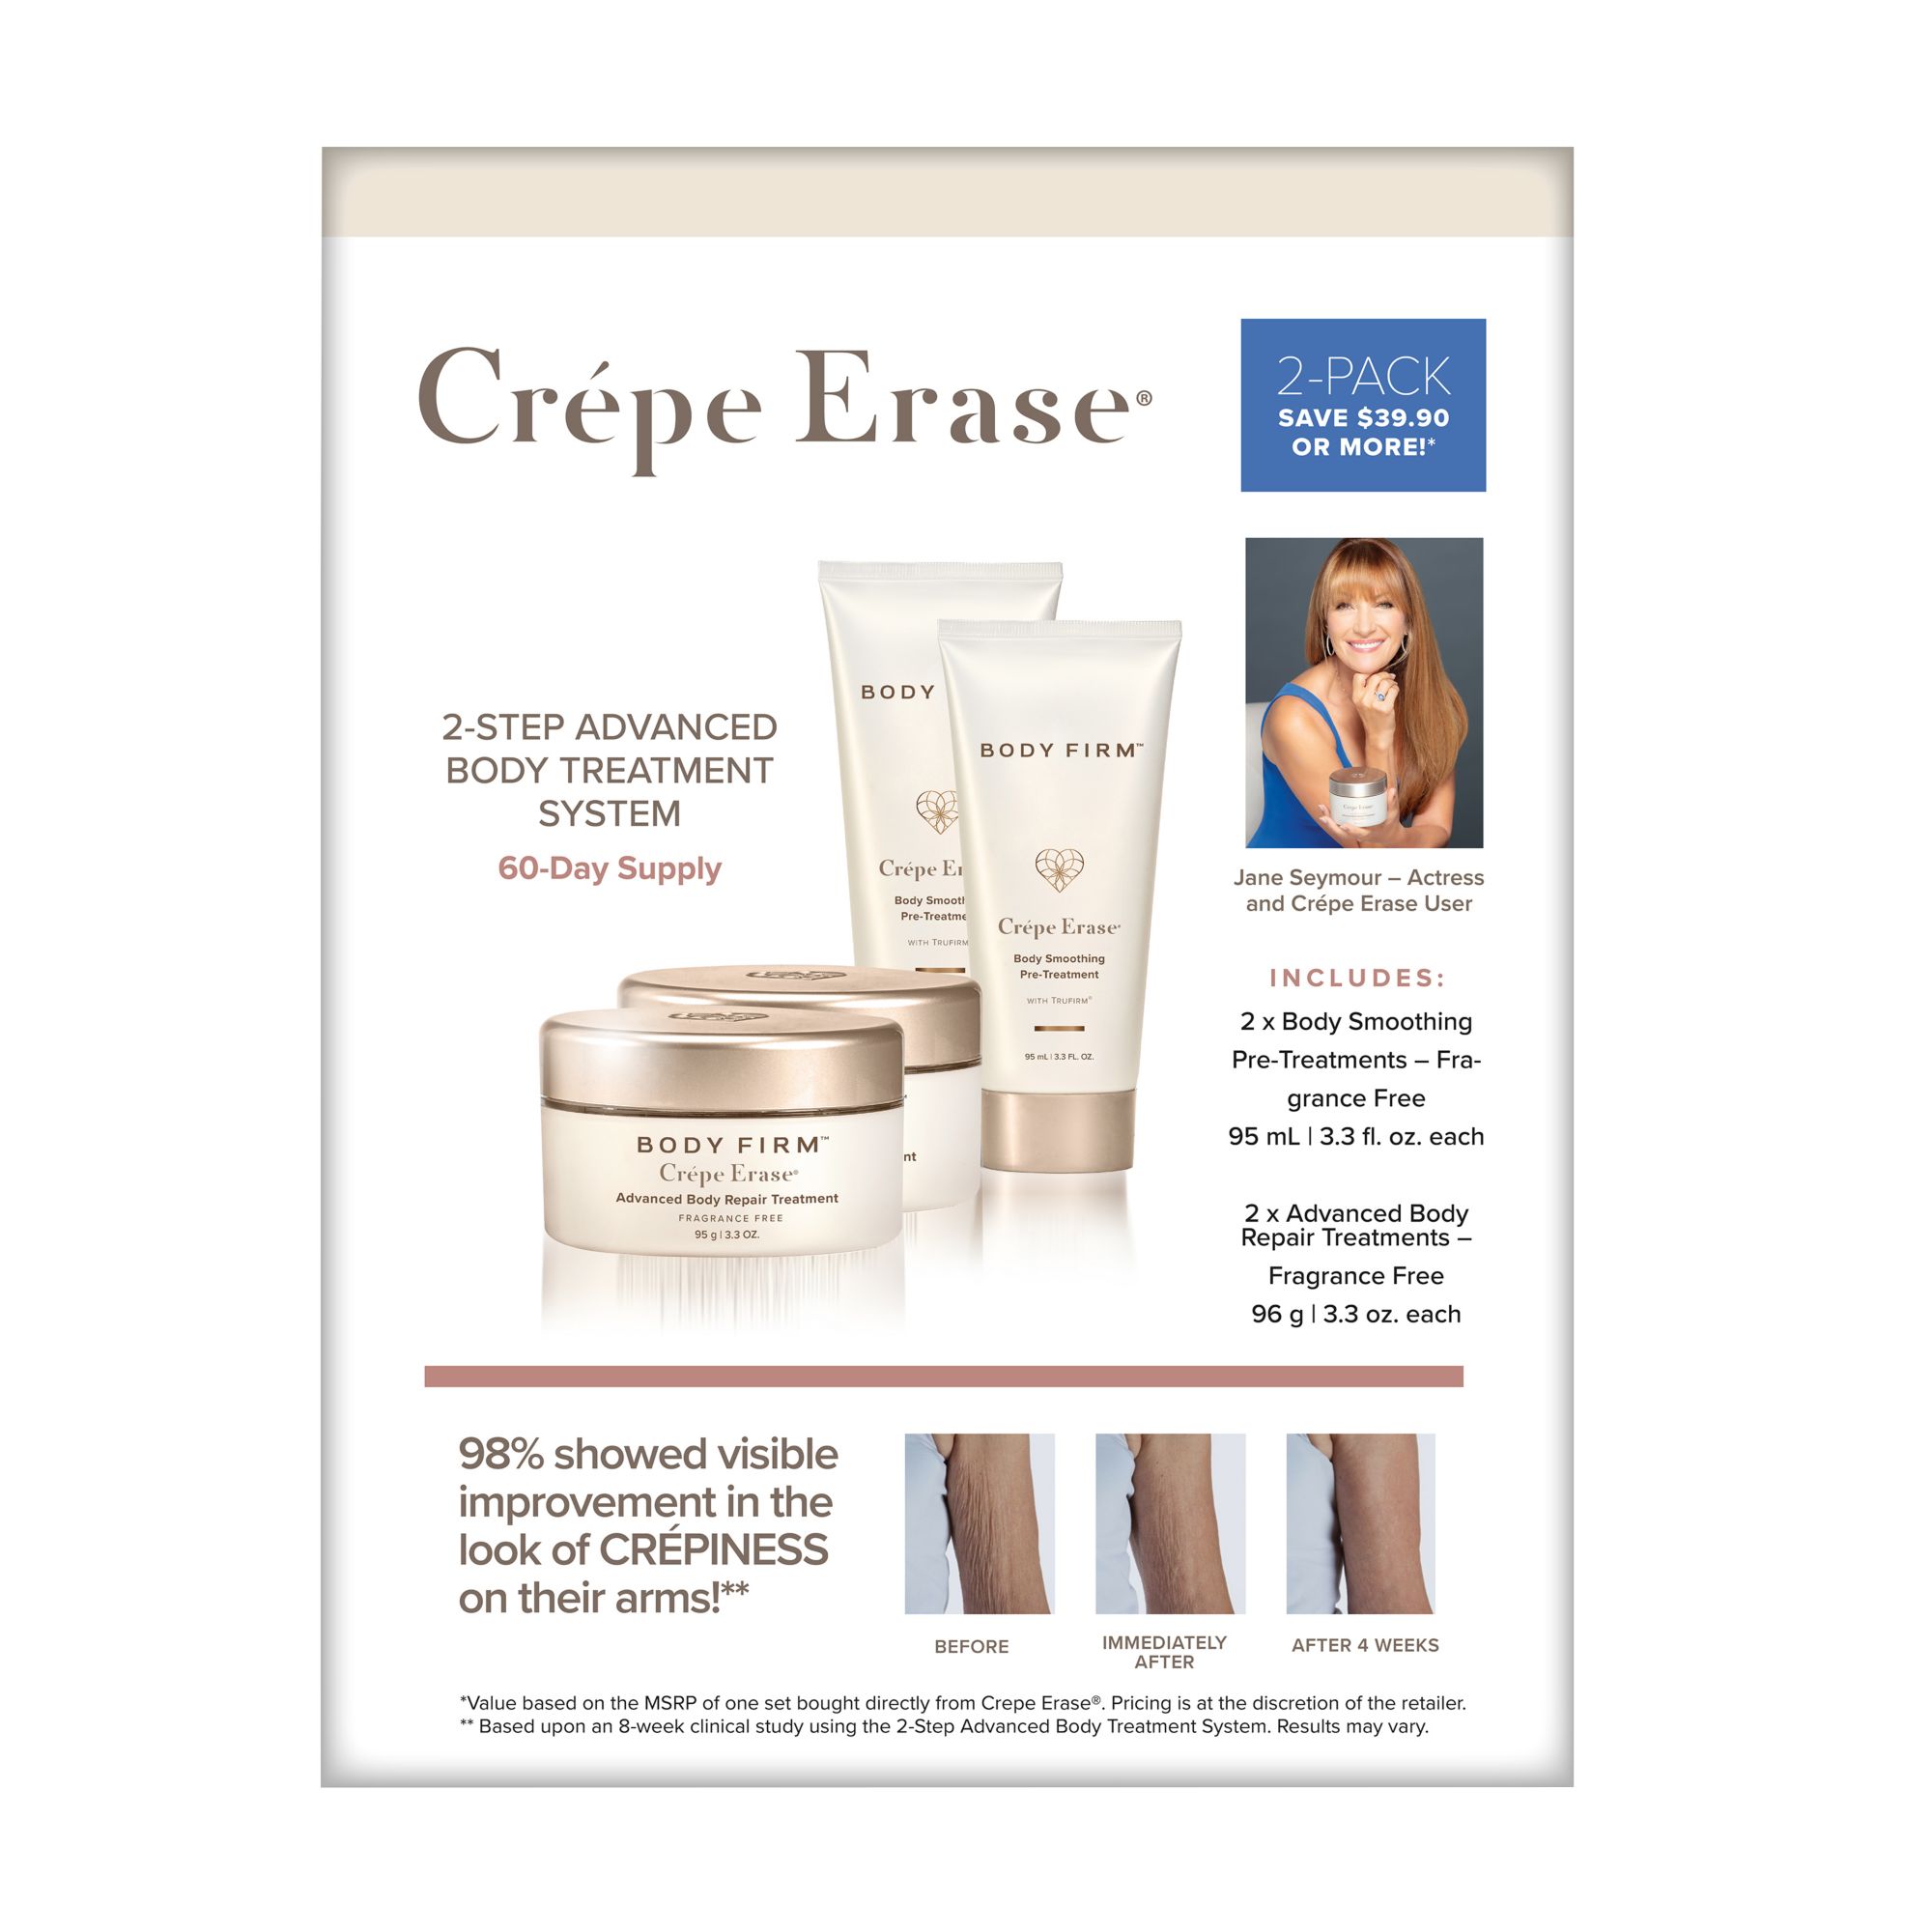 Product info for Intensive Body Repair Treatment by Crepe Erase